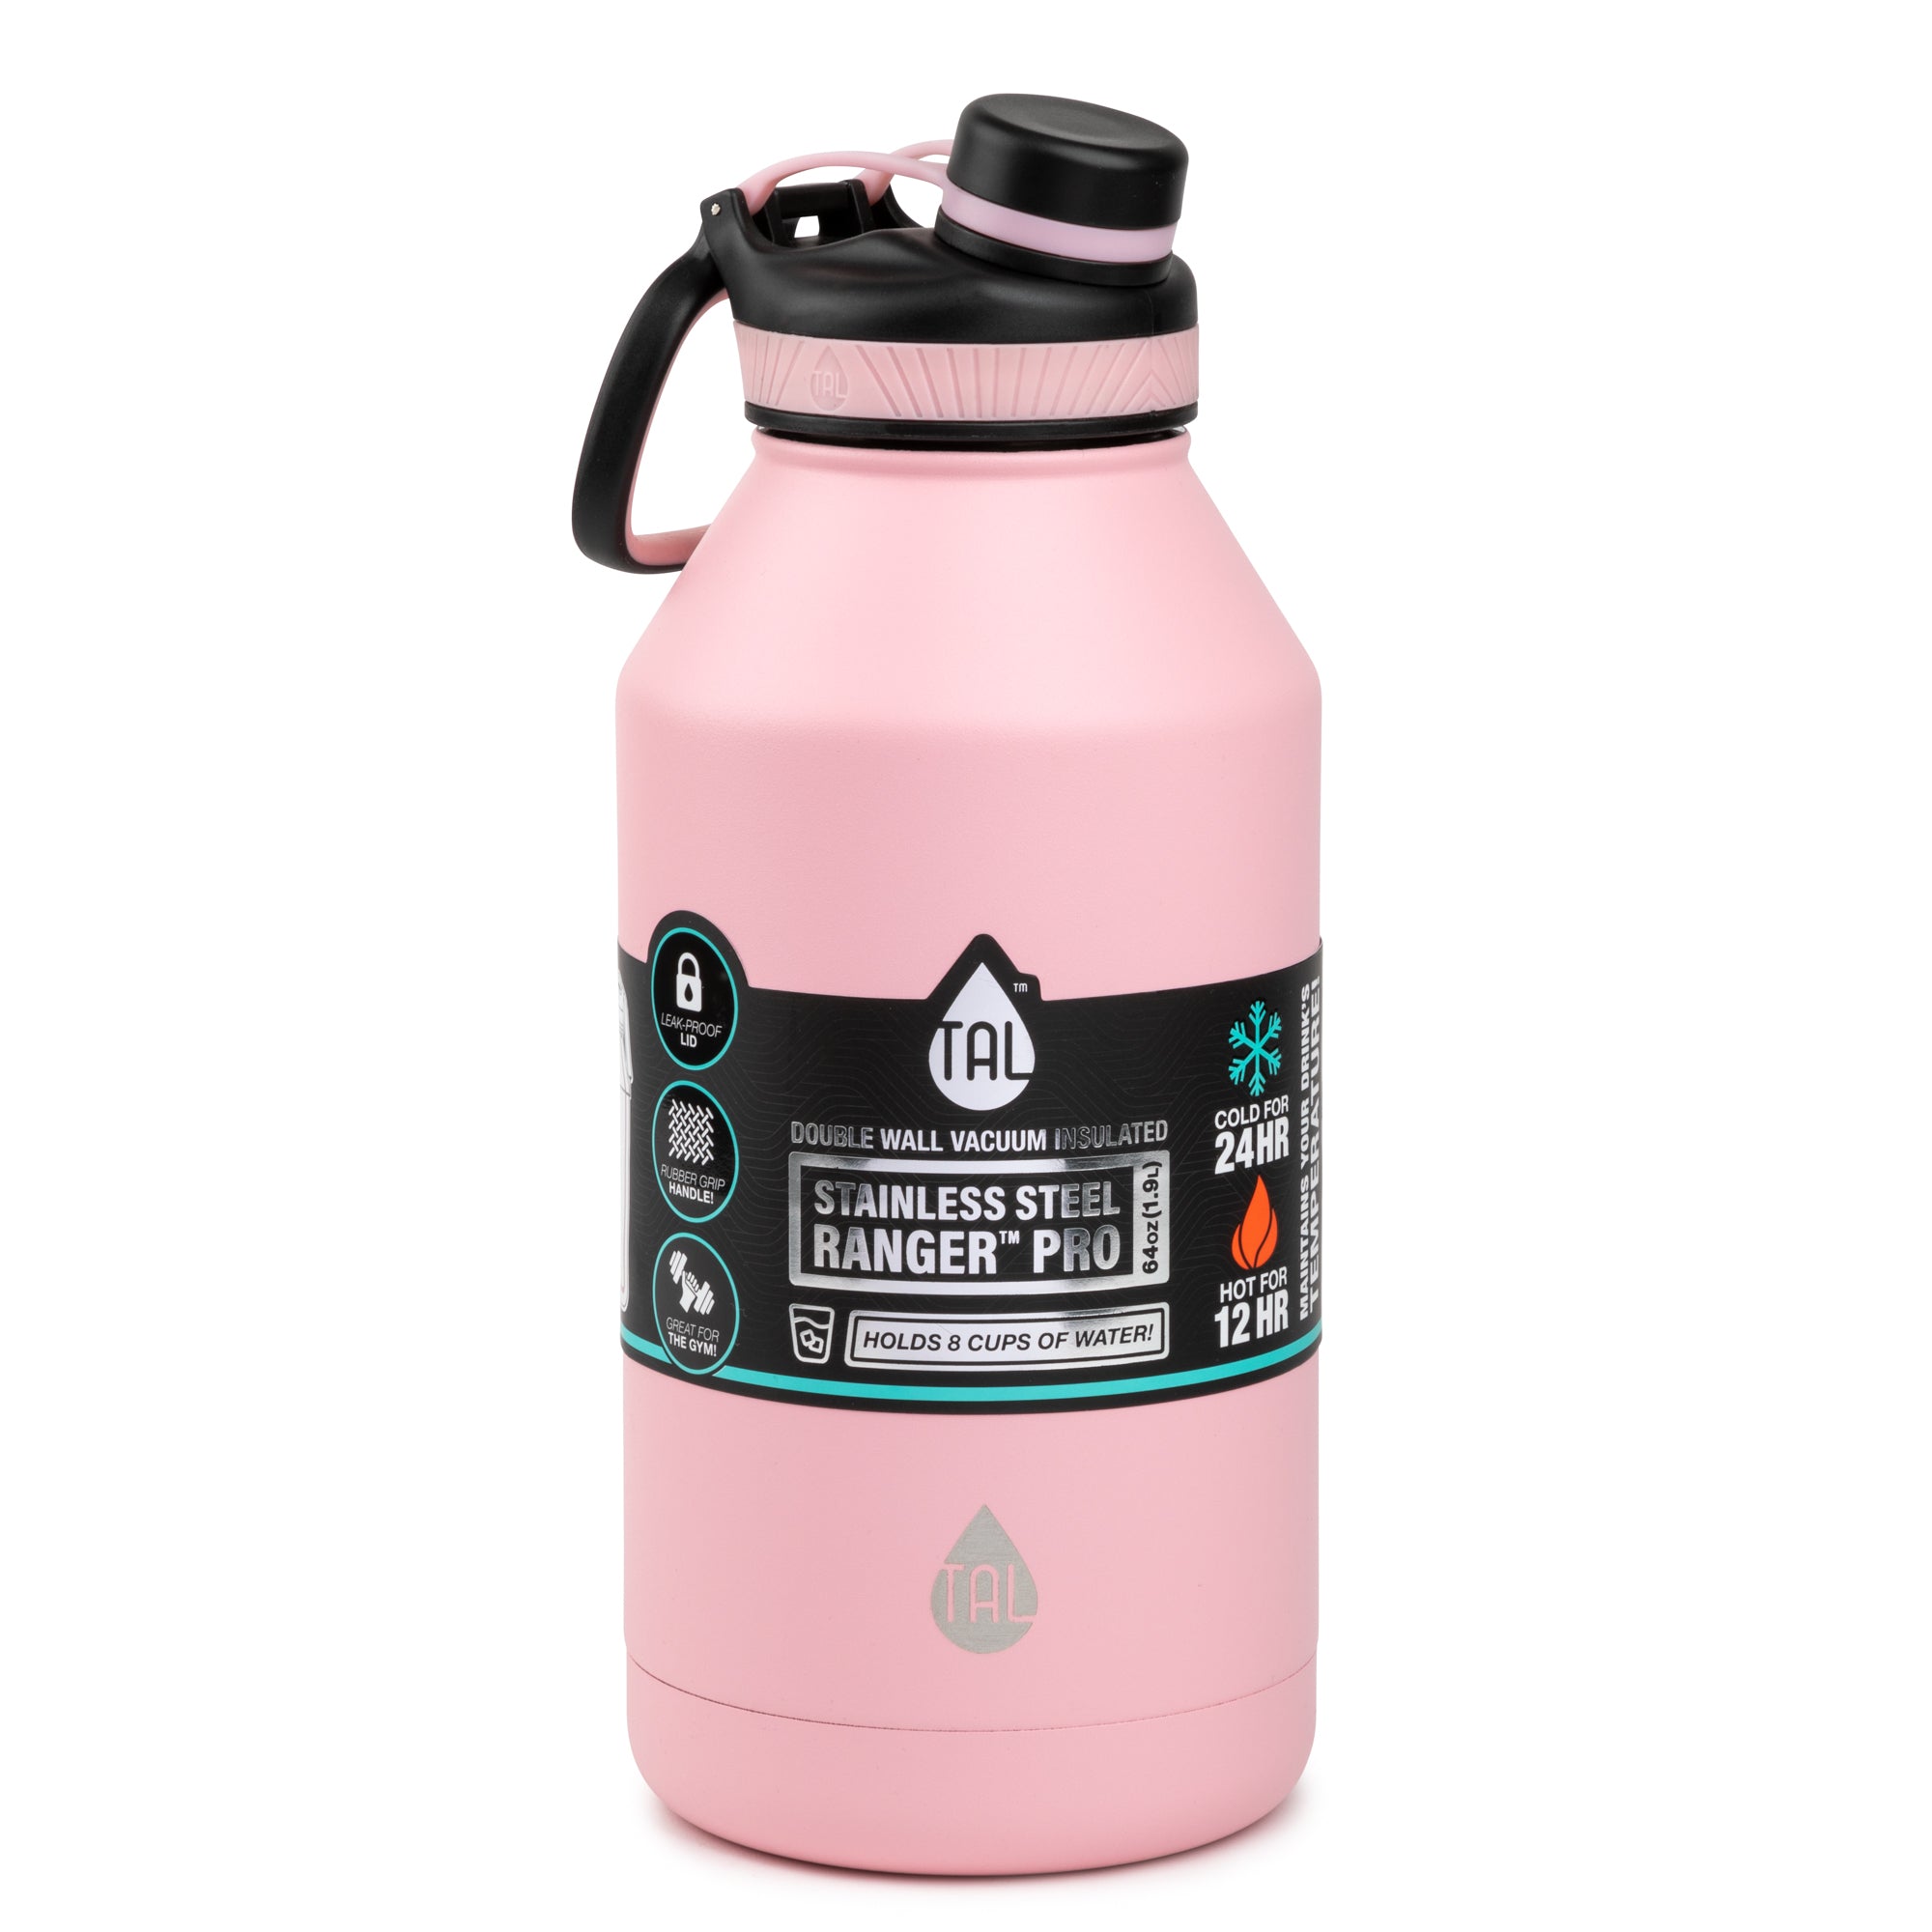  Tal Water Bottle Double Wall Insulated Stainless Steel